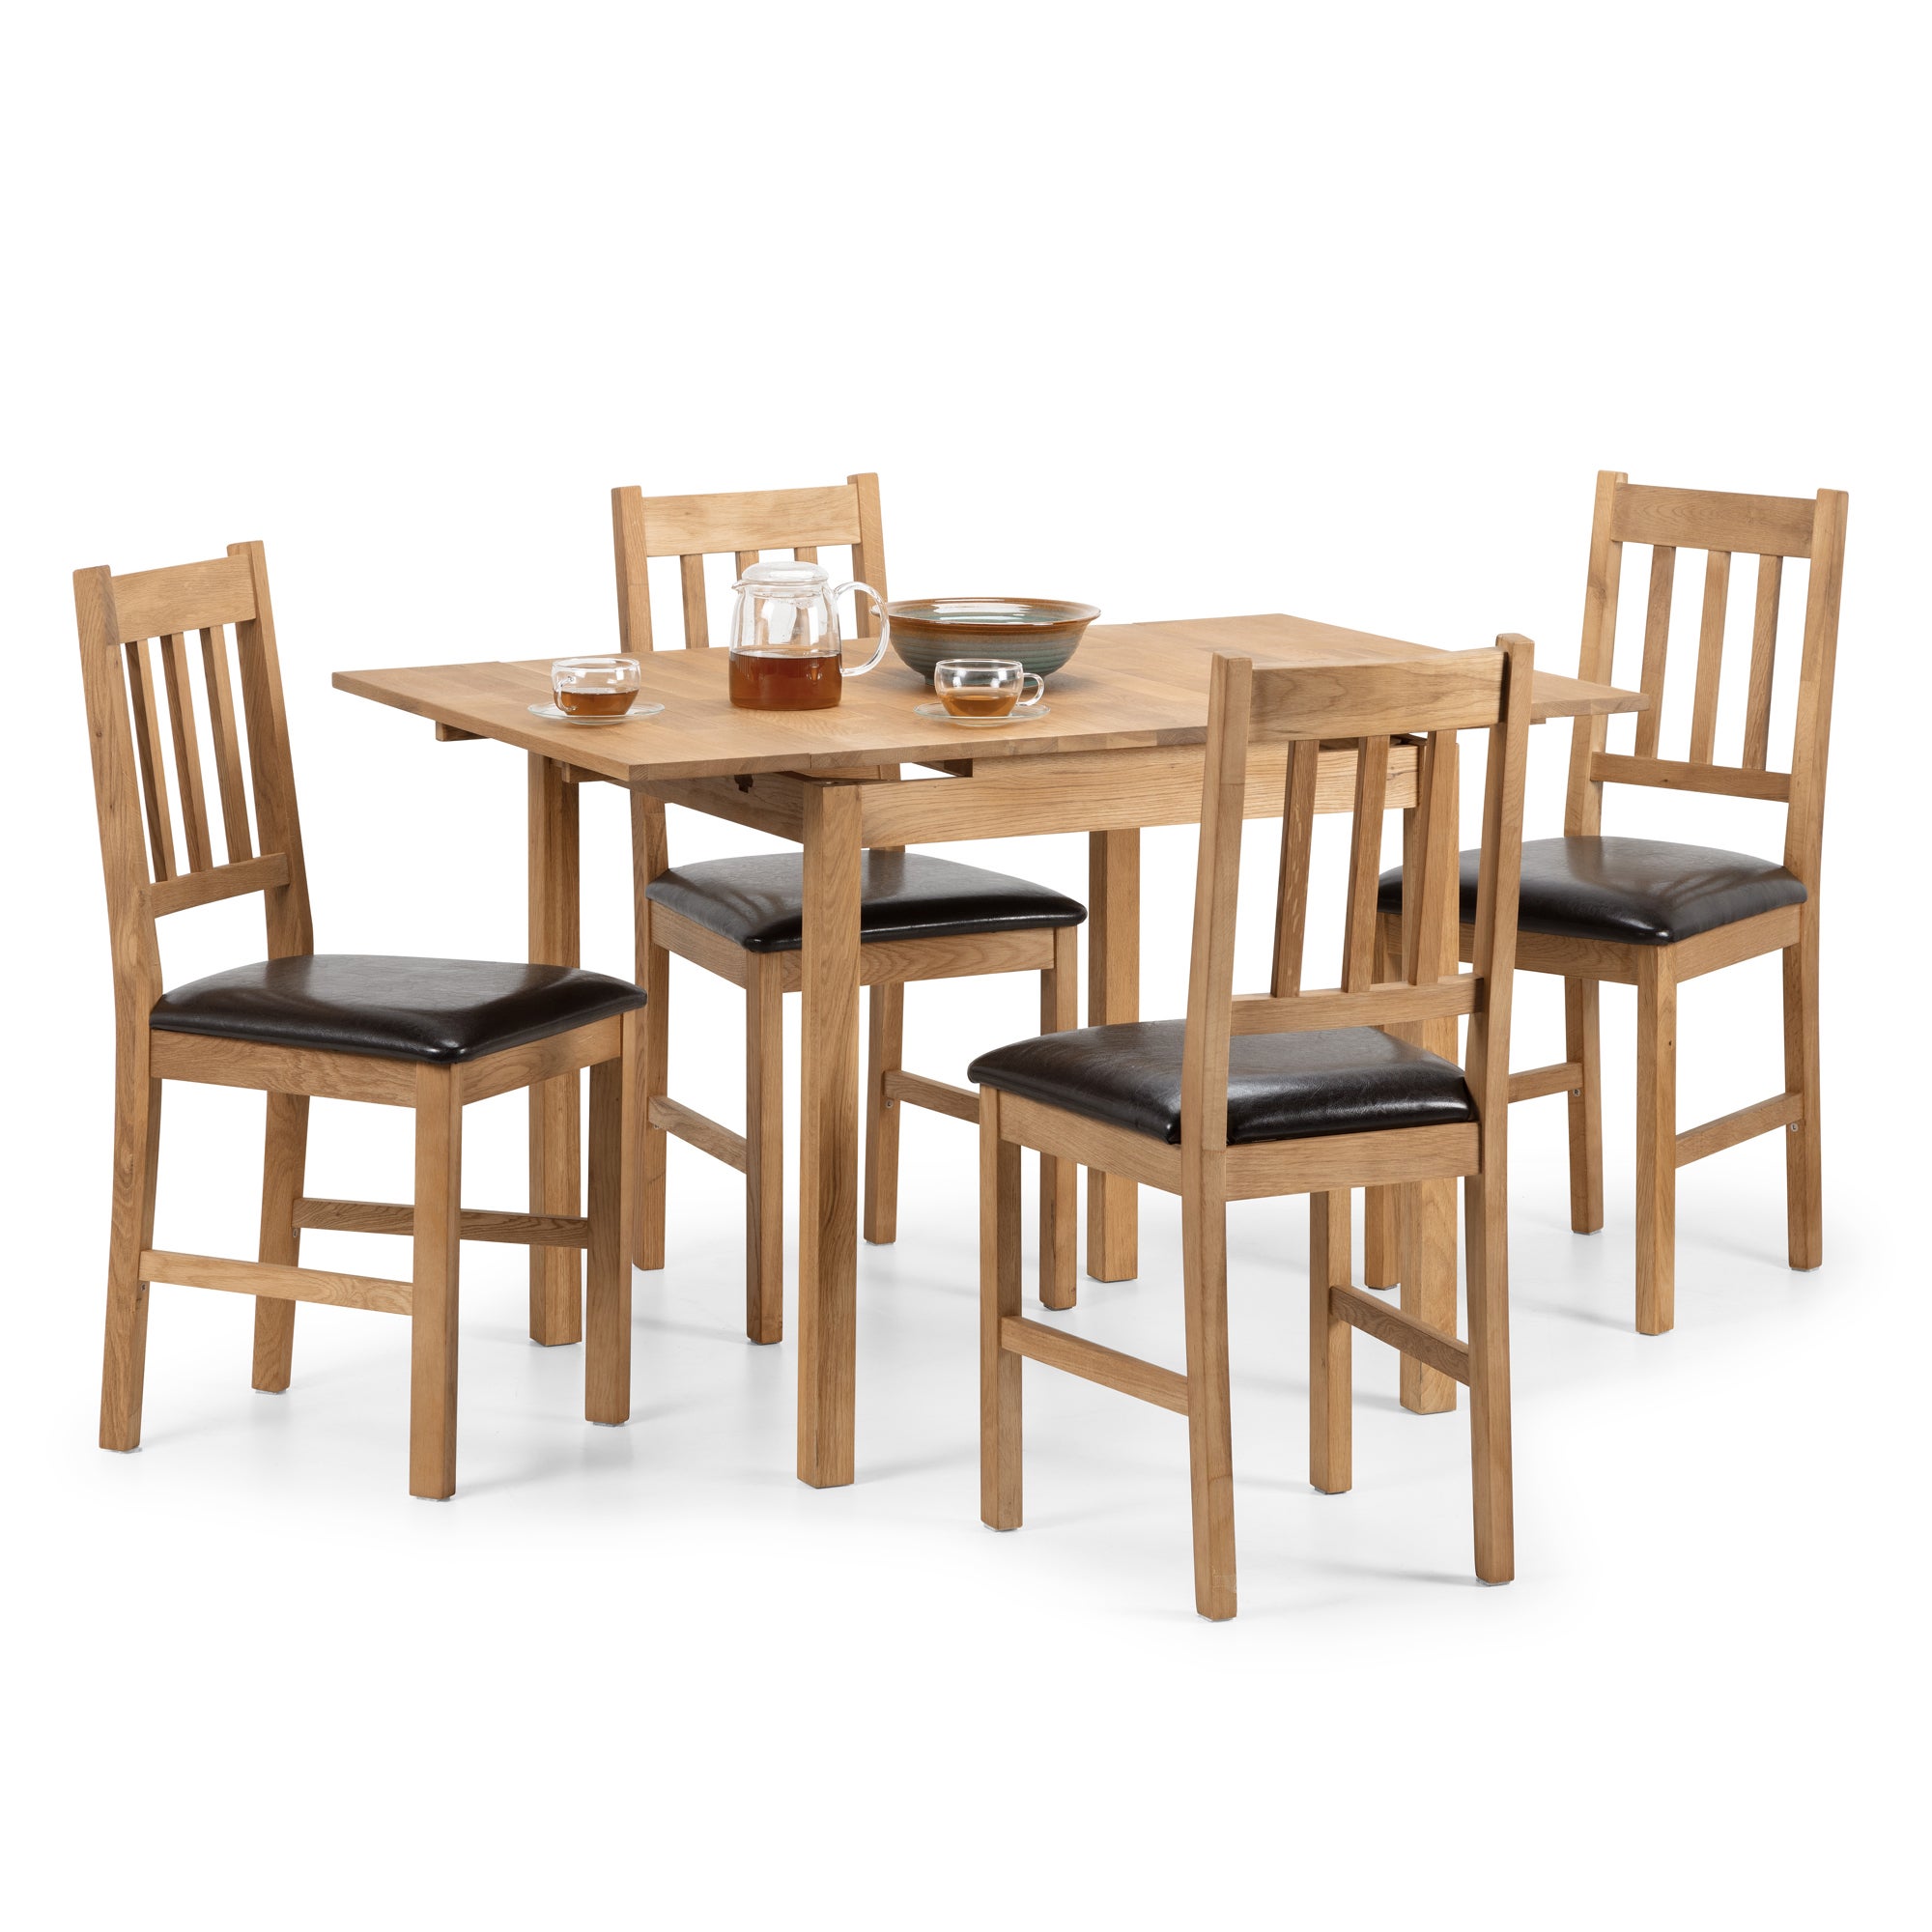 Coxmoor Square Extendable Dining Table With 4 Chairs Solid Oak Brown